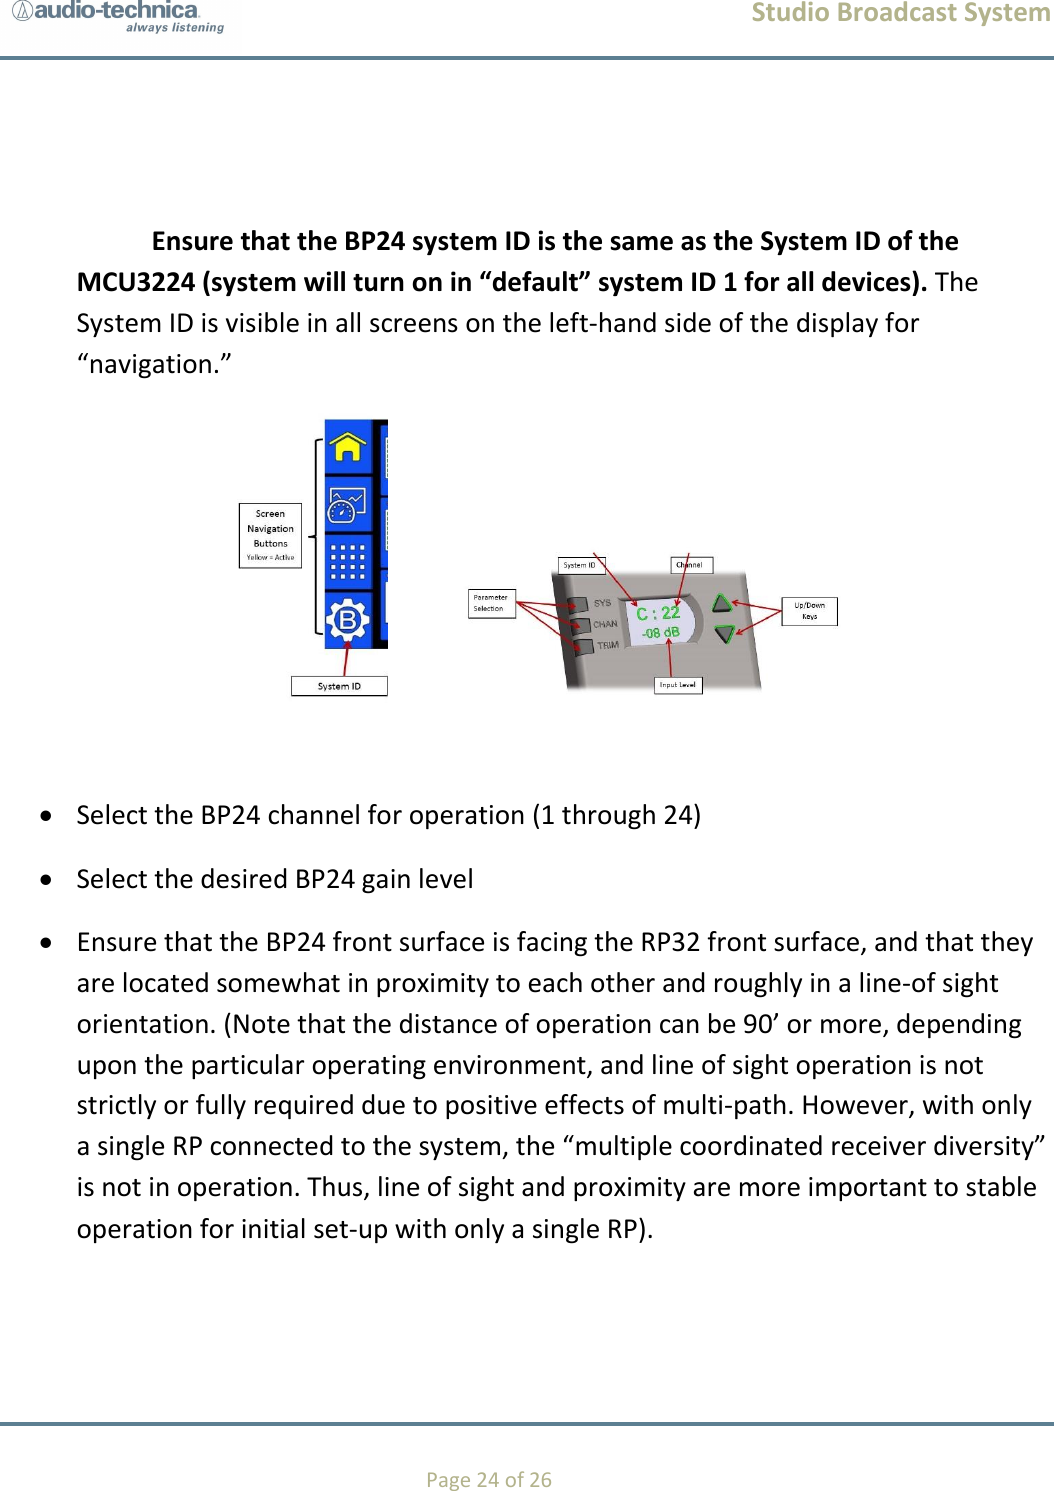 Studio Broadcast System    Page 24 of 26   Ensure that the BP24 system ID is the same as the System ID of the MCU3224 (system will turn on in “default” system ID 1 for all devices). The System ID is visible in all screens on the left-hand side of the display for “navigation.”        Select the BP24 channel for operation (1 through 24)  Select the desired BP24 gain level    Ensure that the BP24 front surface is facing the RP32 front surface, and that they are located somewhat in proximity to each other and roughly in a line-of sight orientation. (Note that the distance of operation can be 90’ or more, depending upon the particular operating environment, and line of sight operation is not strictly or fully required due to positive effects of multi-path. However, with only a single RP connected to the system, the “multiple coordinated receiver diversity” is not in operation. Thus, line of sight and proximity are more important to stable operation for initial set-up with only a single RP).   